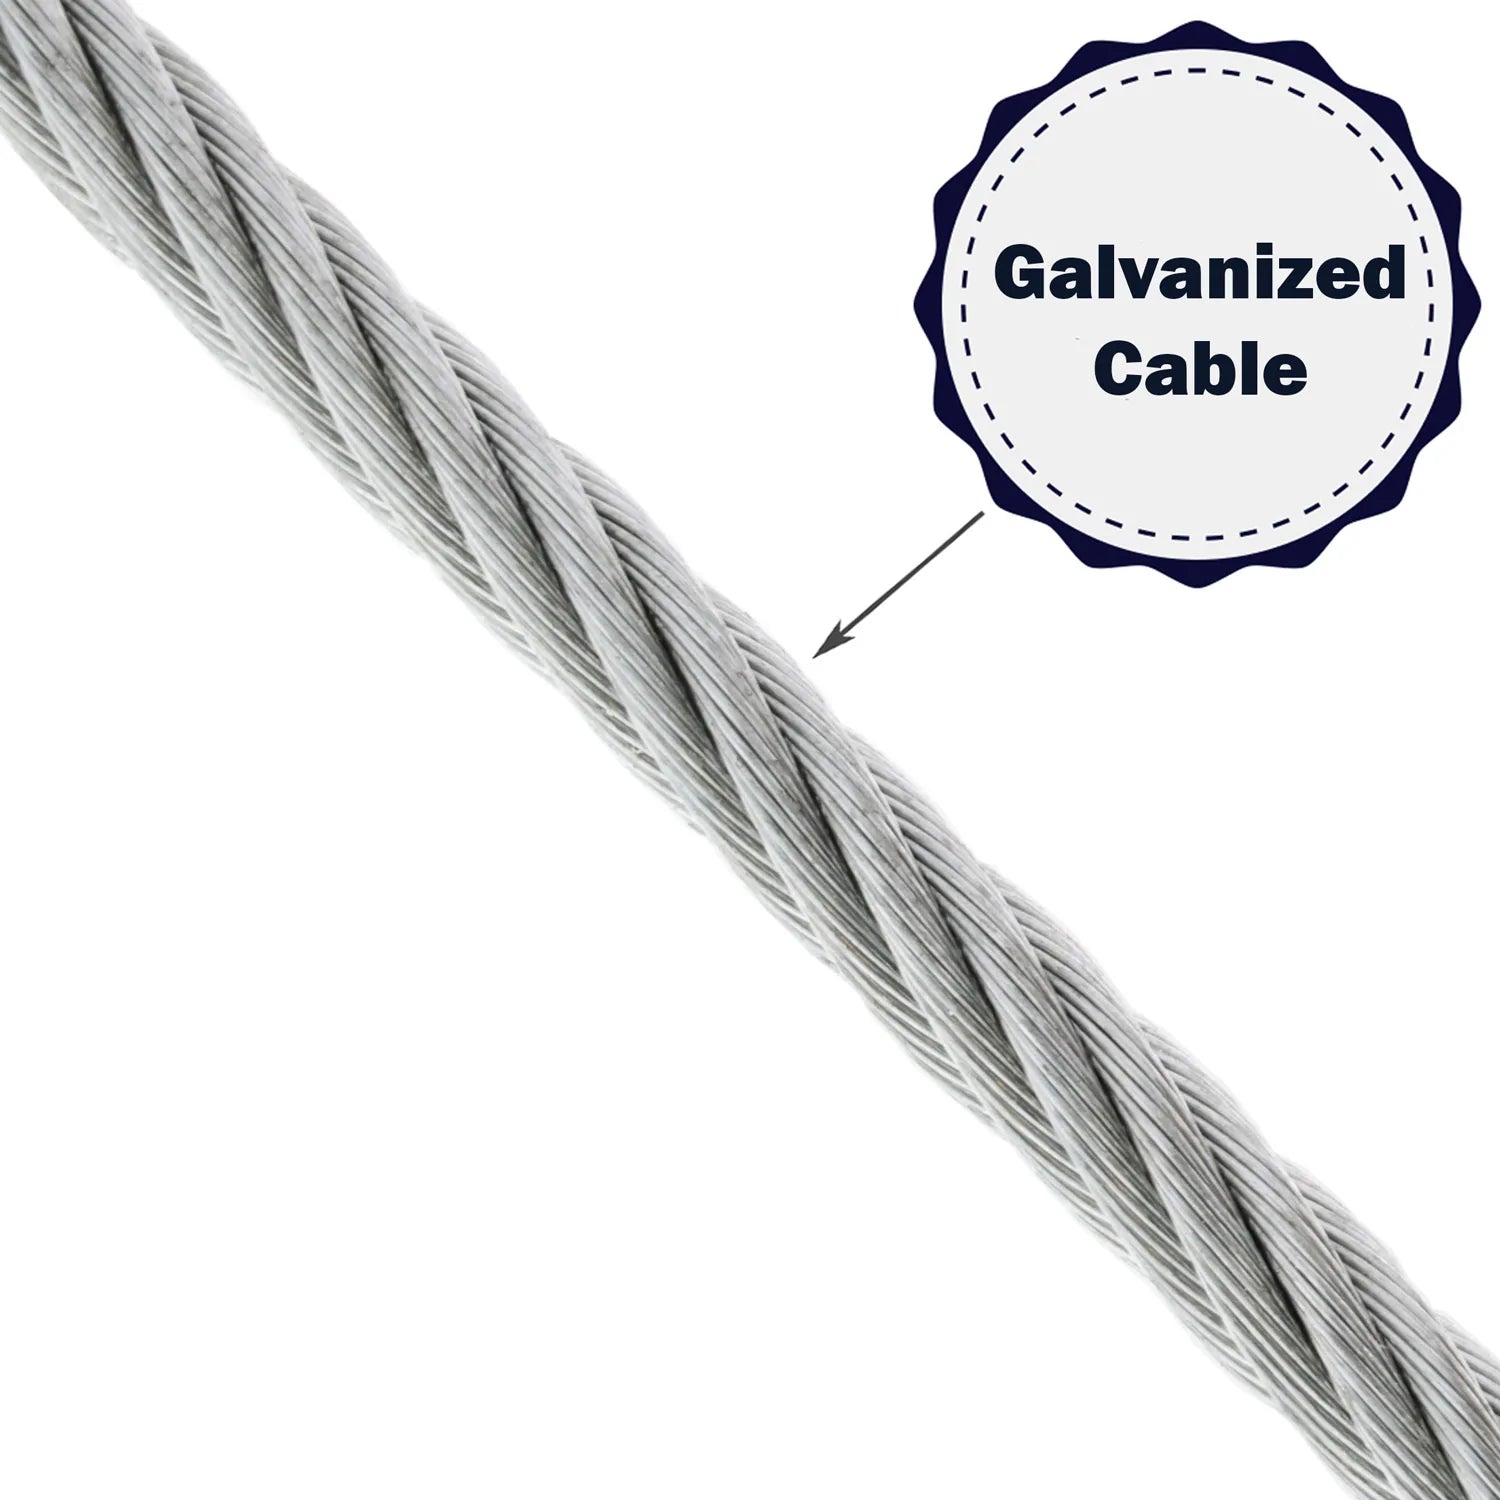 195 Ft Cable Length Black Oxidize Galvanized Steel Wire Rope 1/8” 7X19 Stage Theater Display Cable Cable Only